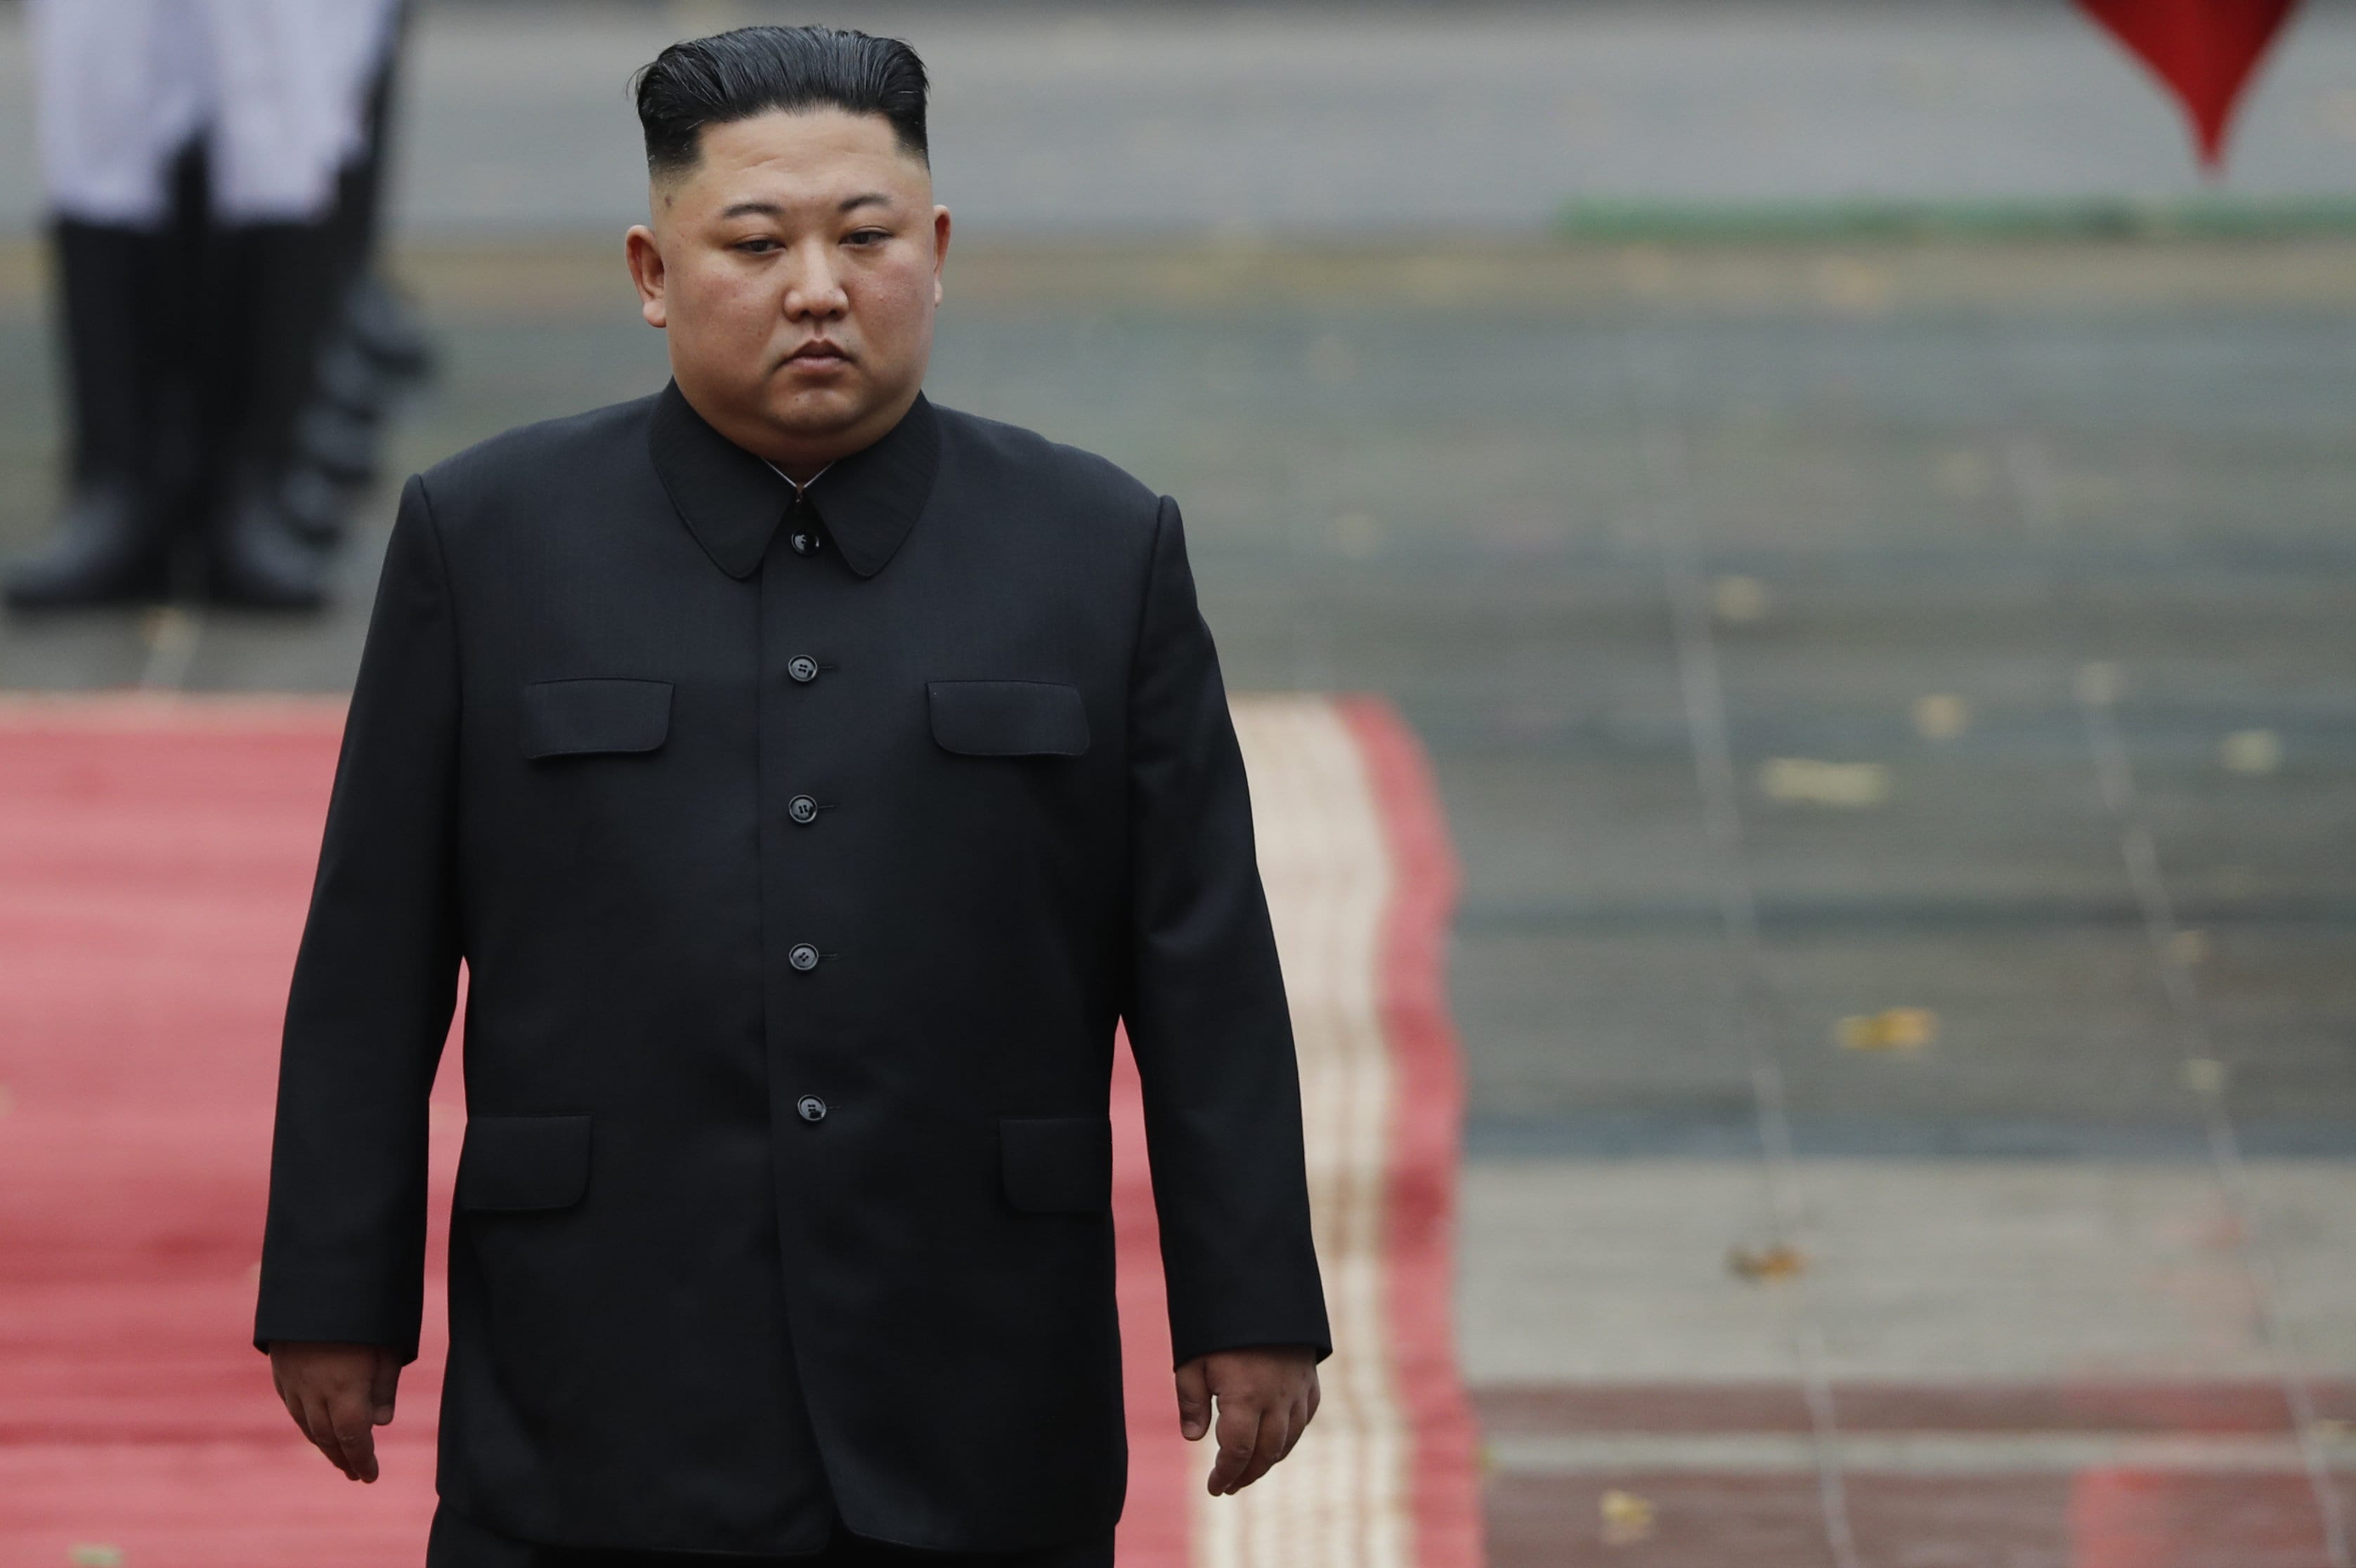 North Korea fired two unidentified projectiles, South Korea's military says